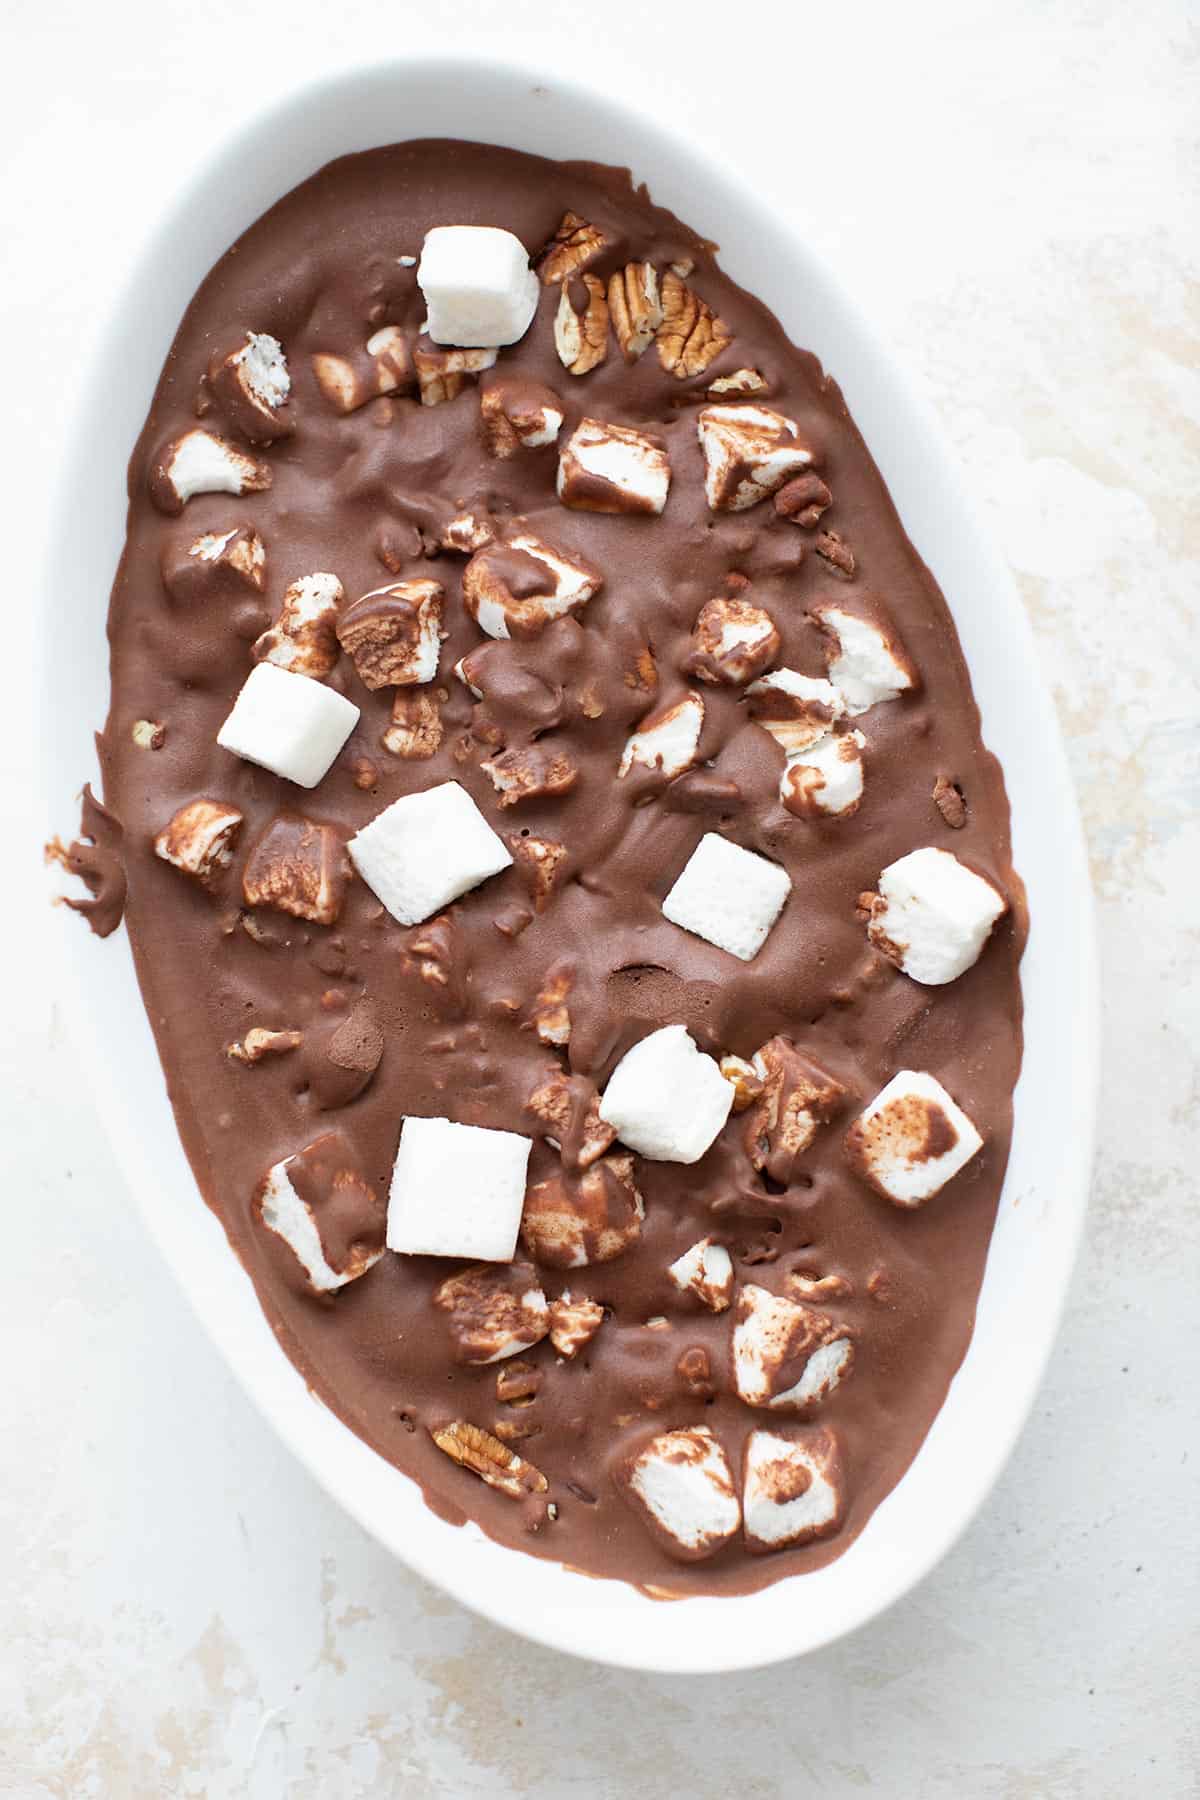 Top down image of keto rocky road ice cream in an oval white ceramic container.